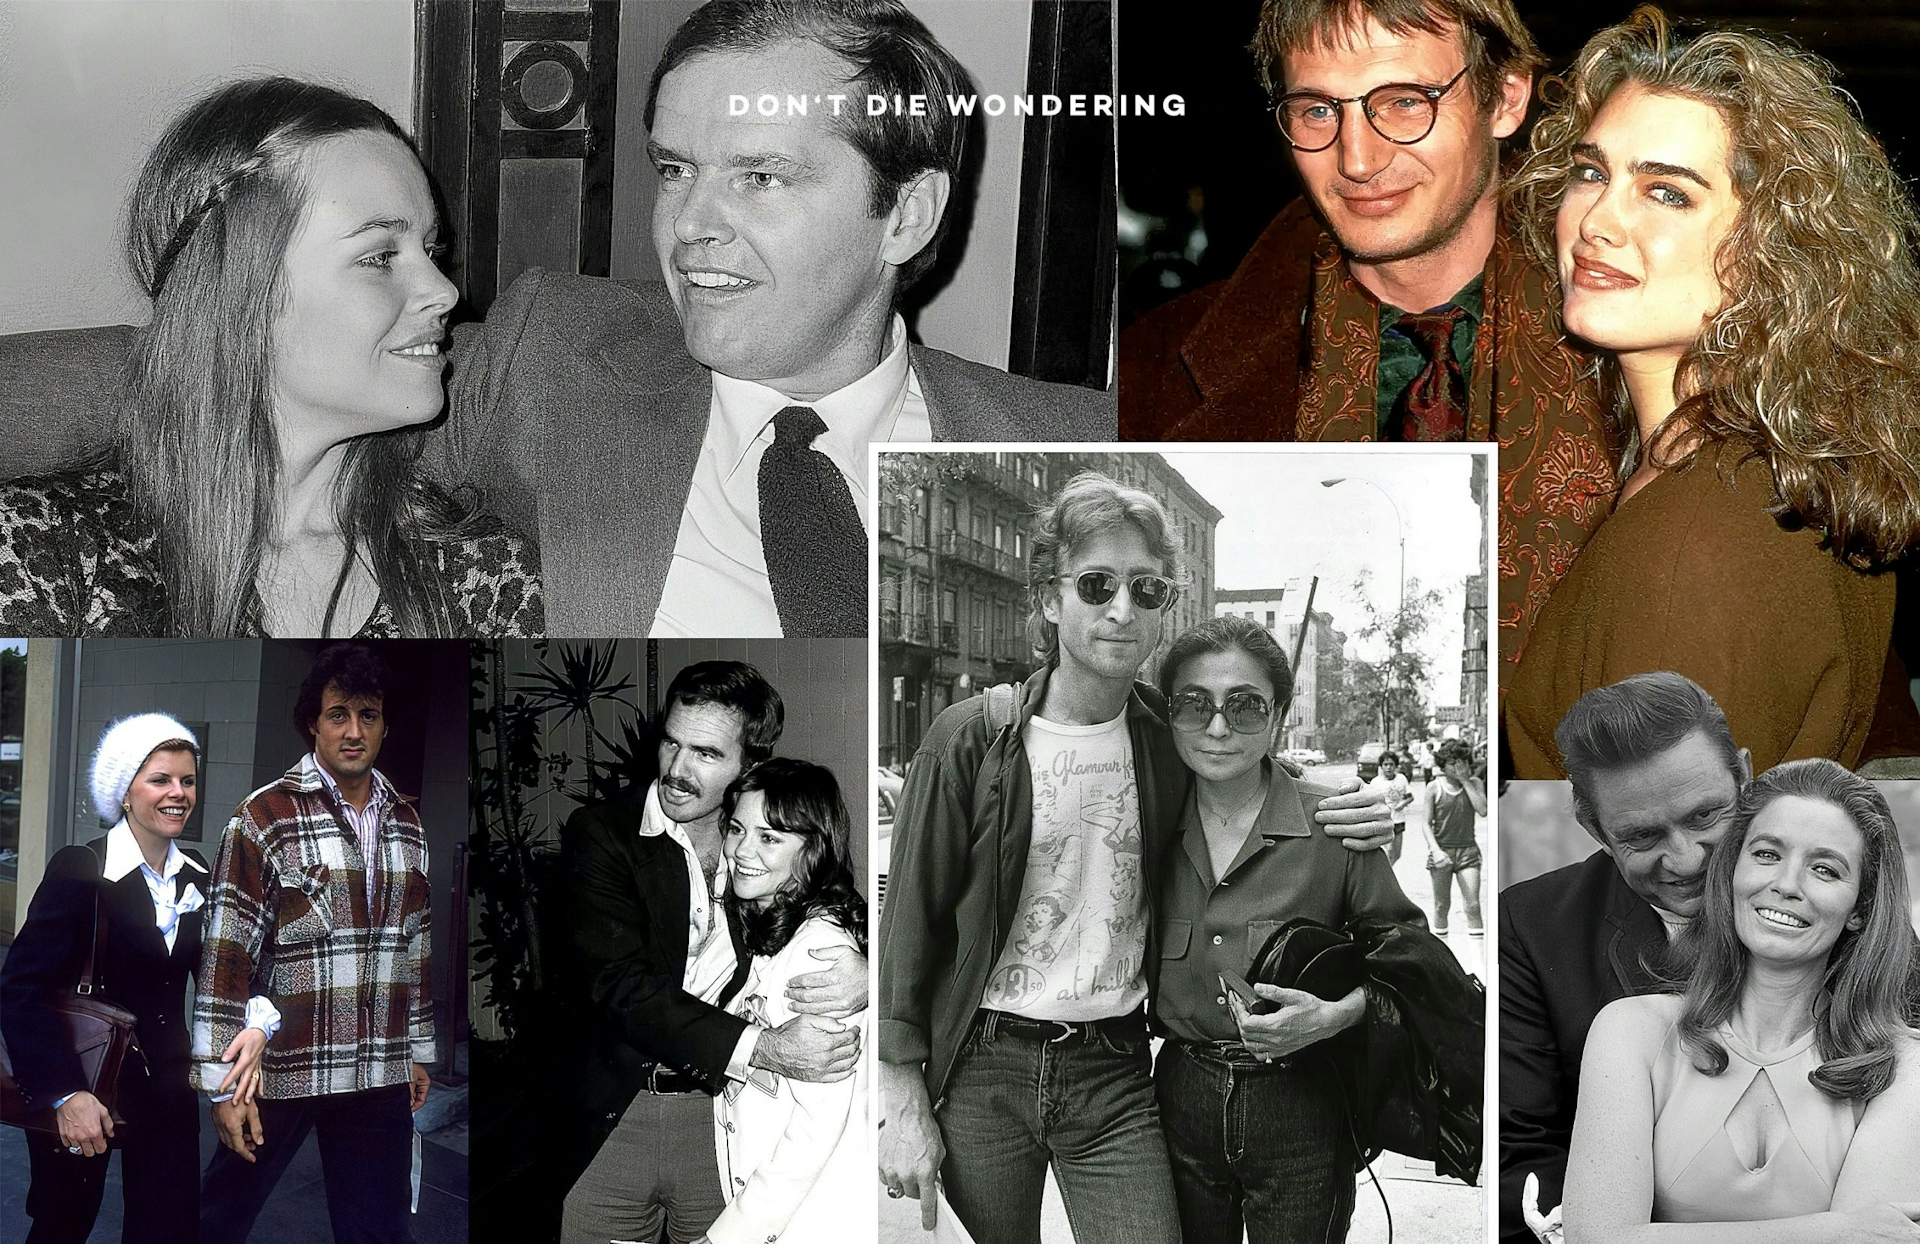 20 Of The ’70s Couples That You’ve Probably Forgotten About